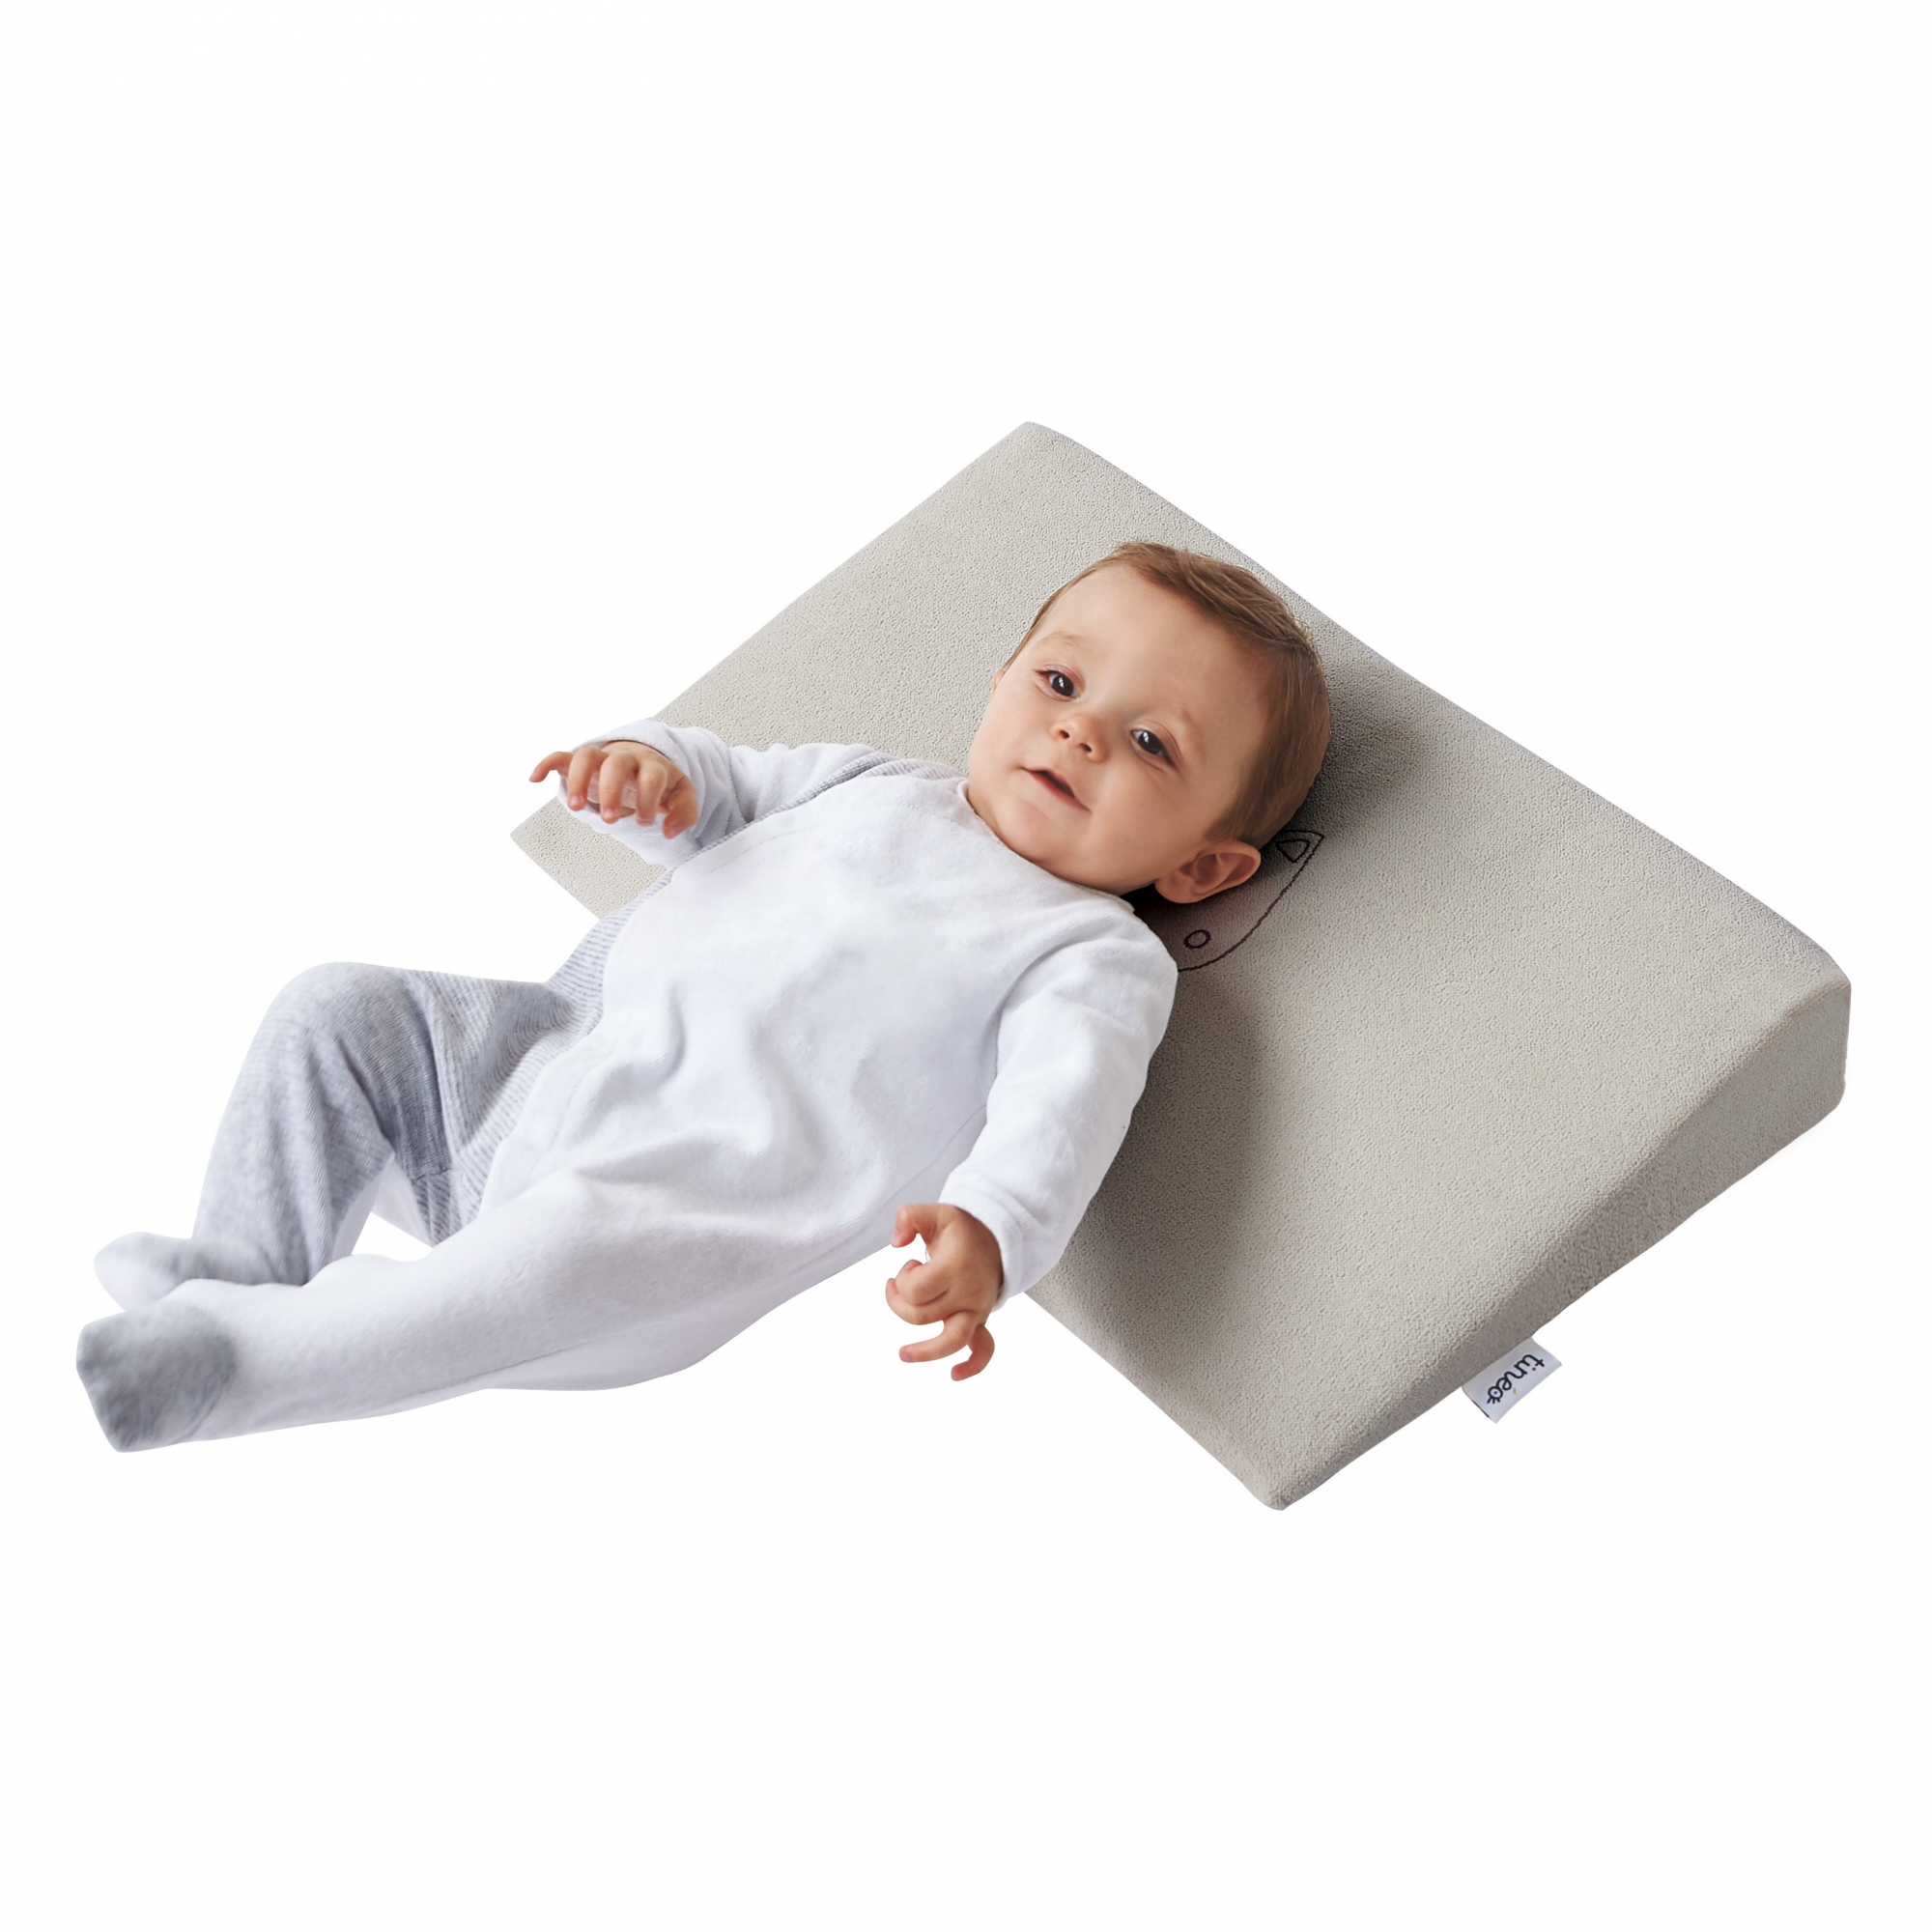 Tineo Plan Incline 15 P Tit Loup Pour Lit 60x1 Cm Made In Bebe